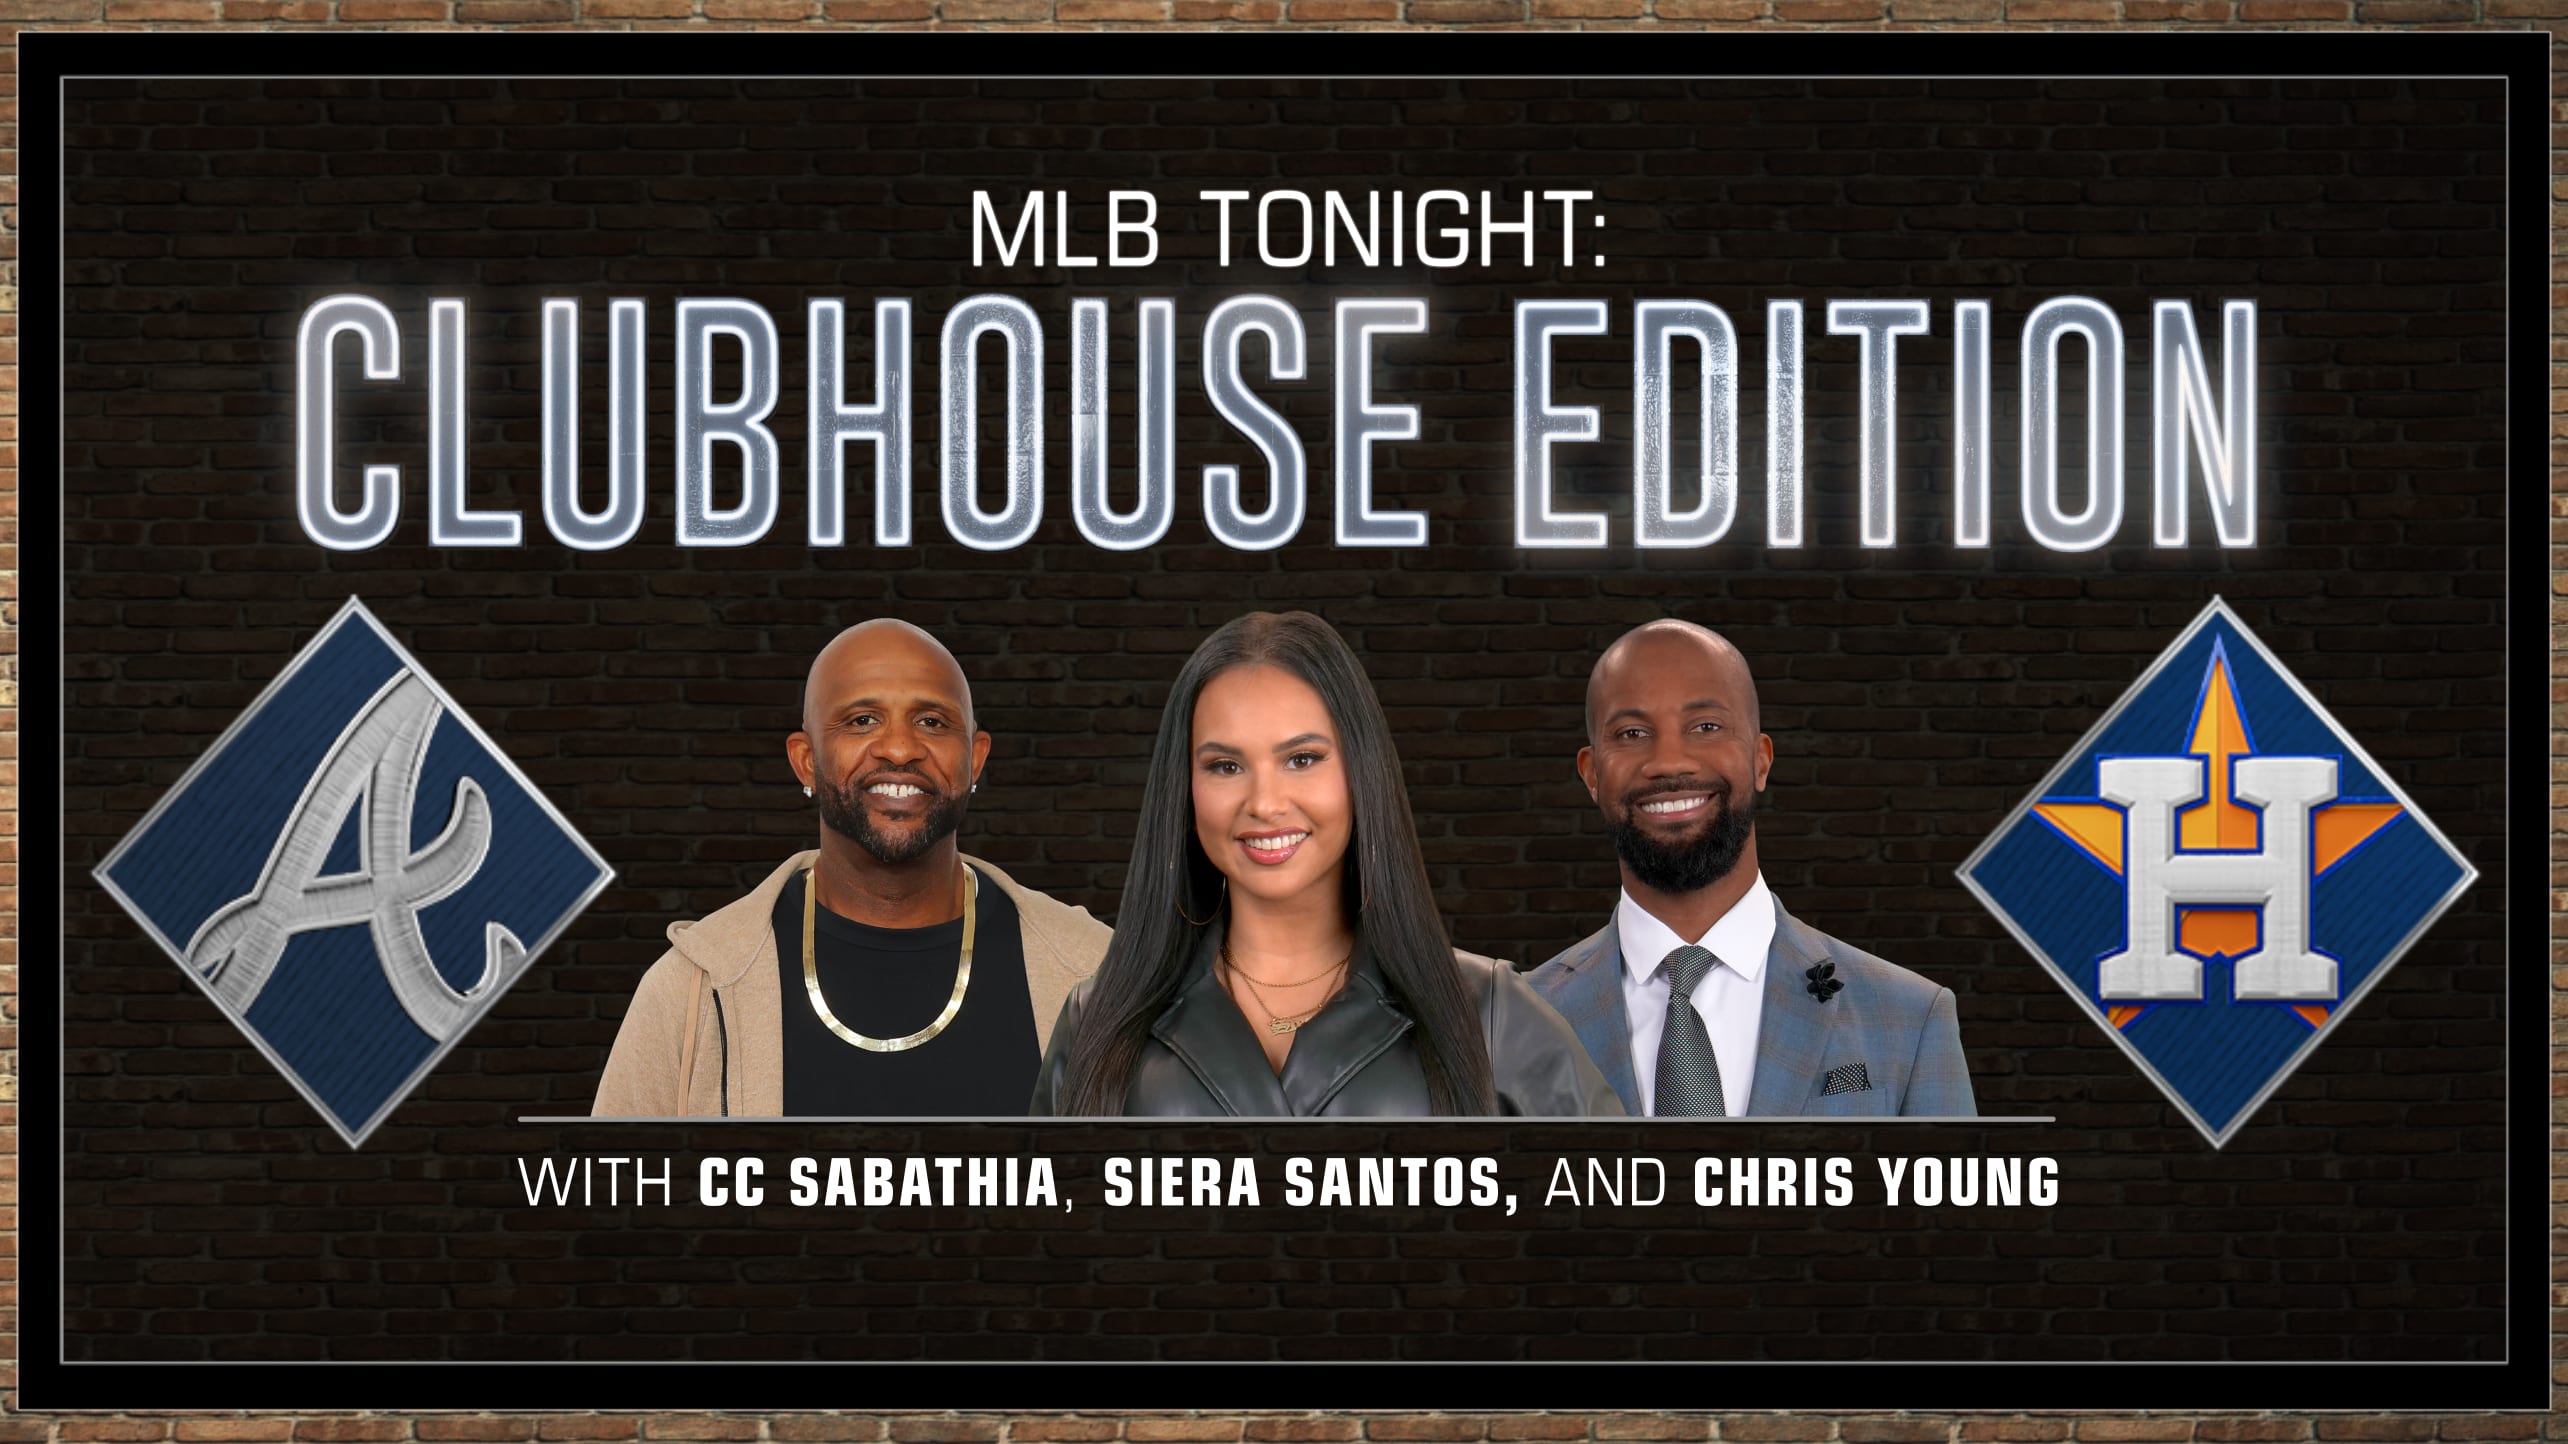 Image for MLB Tonight Clubhouse Edition featuring CC Sabathia, Siera Santos and Chris Young